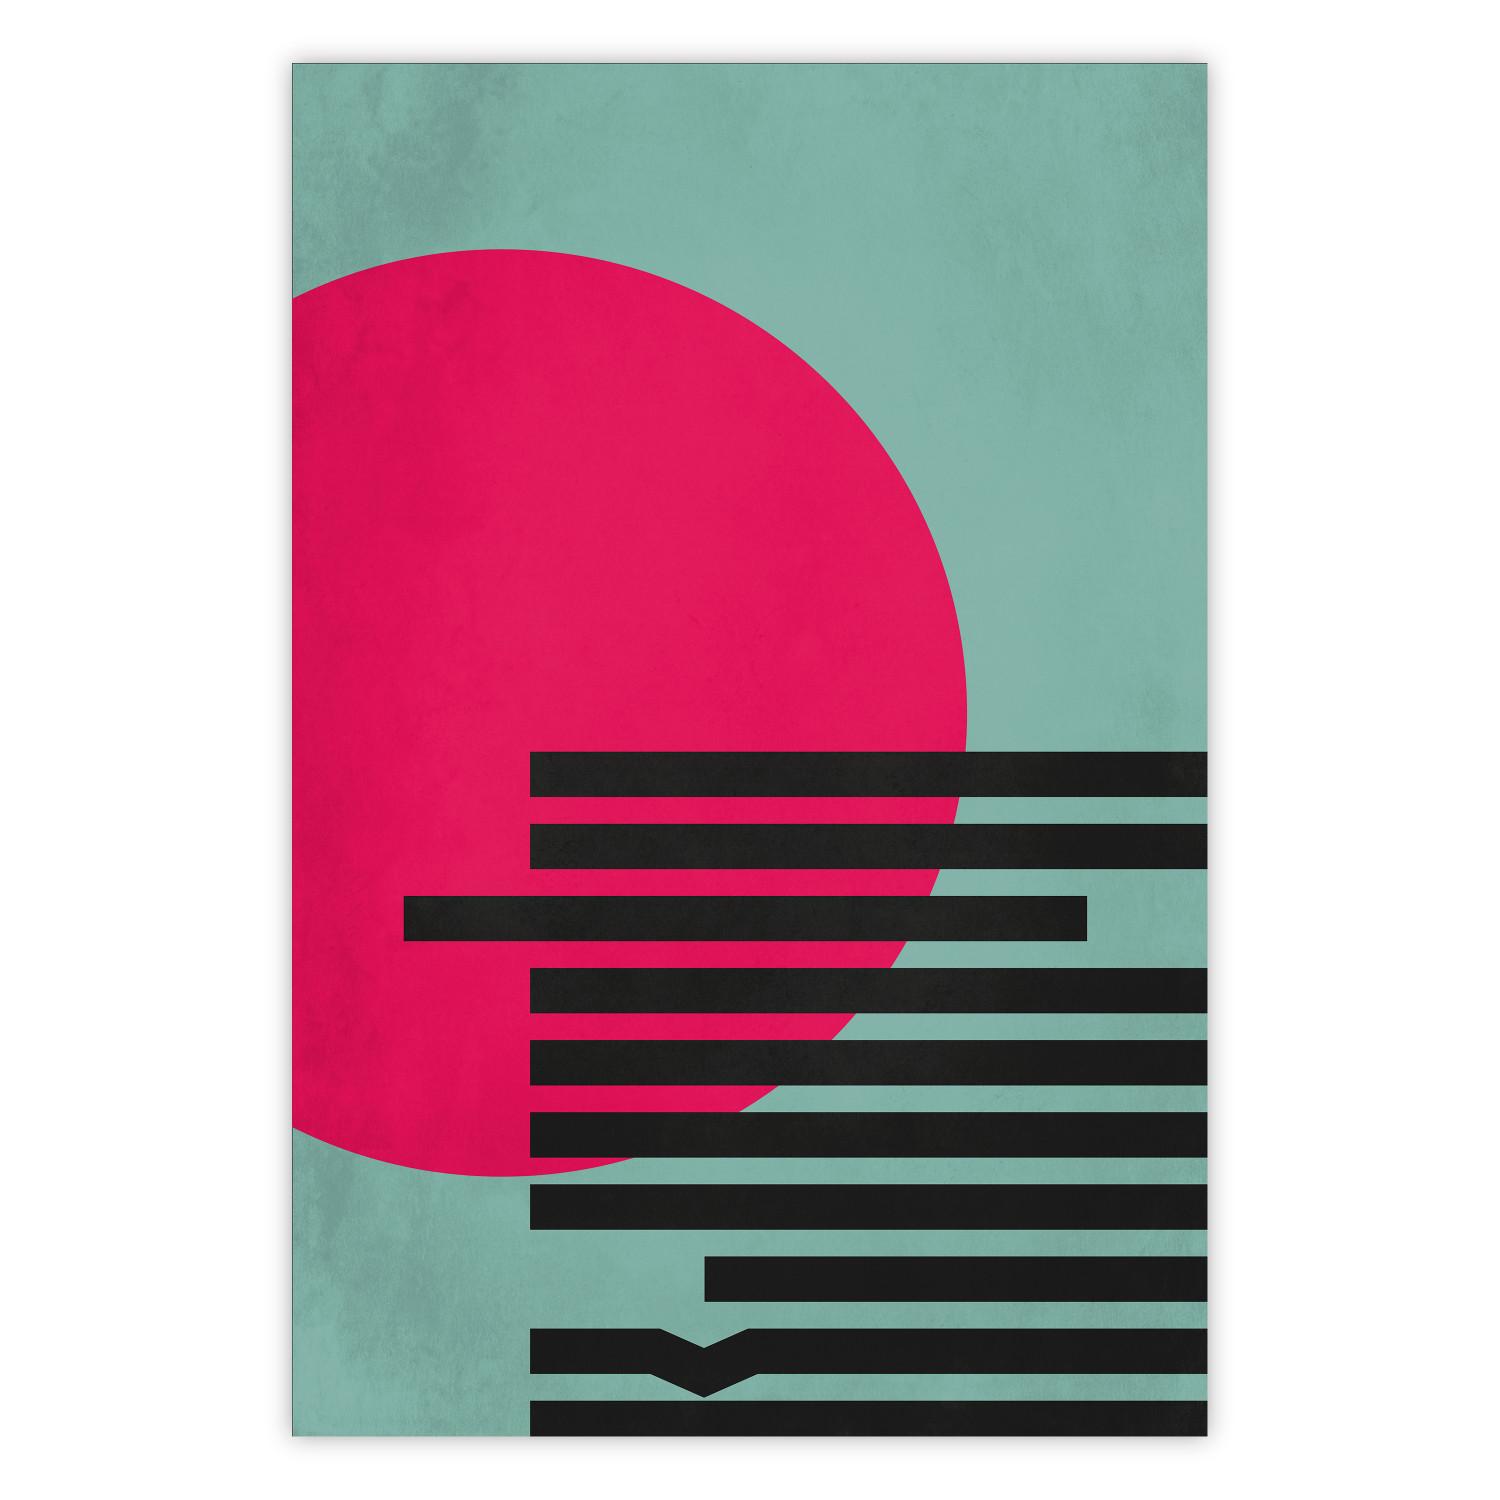 Poster Pink Sun - colorful geometric figures in an abstract motif